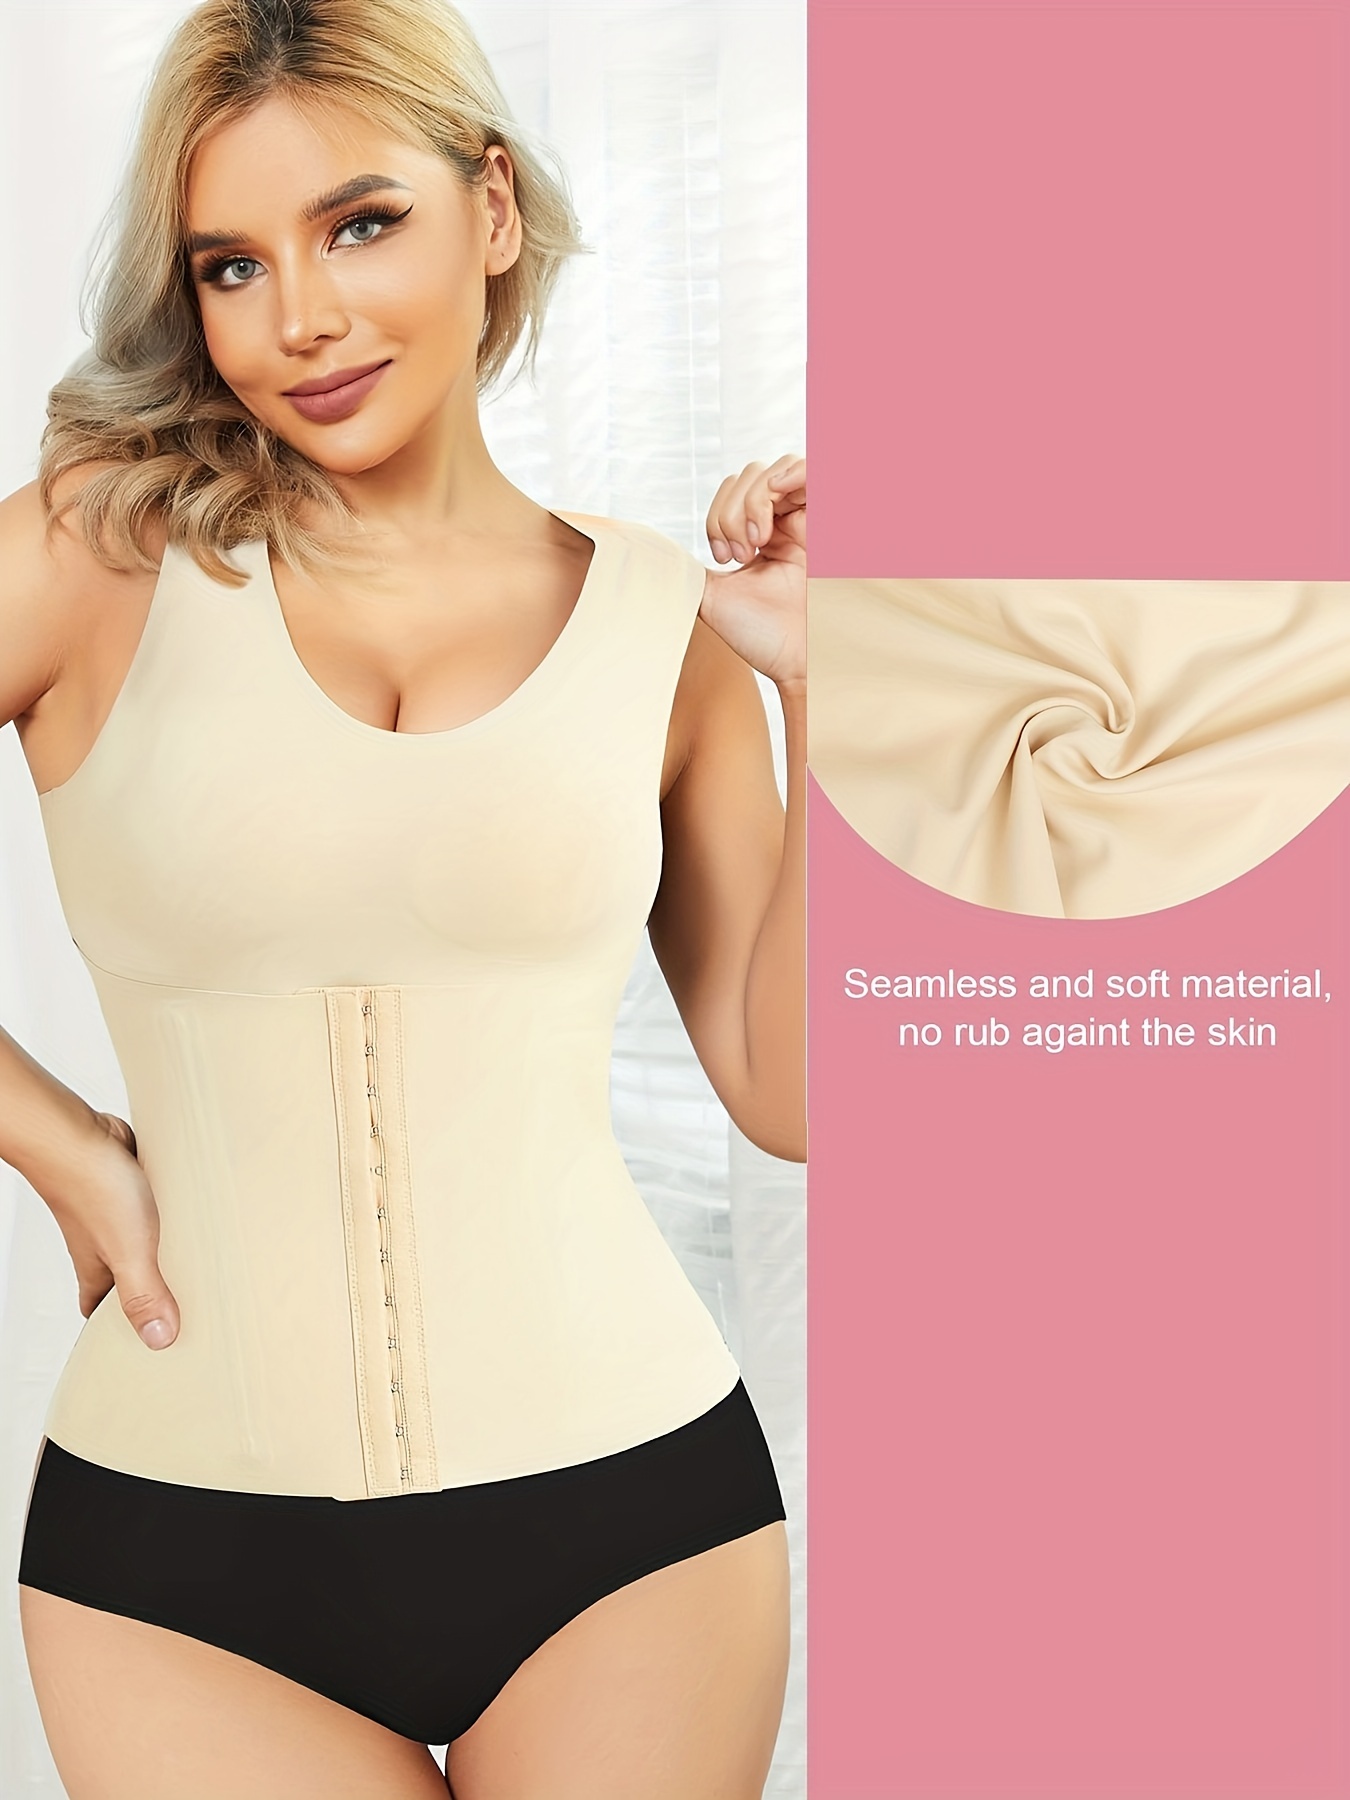 Waist Trainers For Beginners. Part 1 - Bras, Shapewear, Activewear